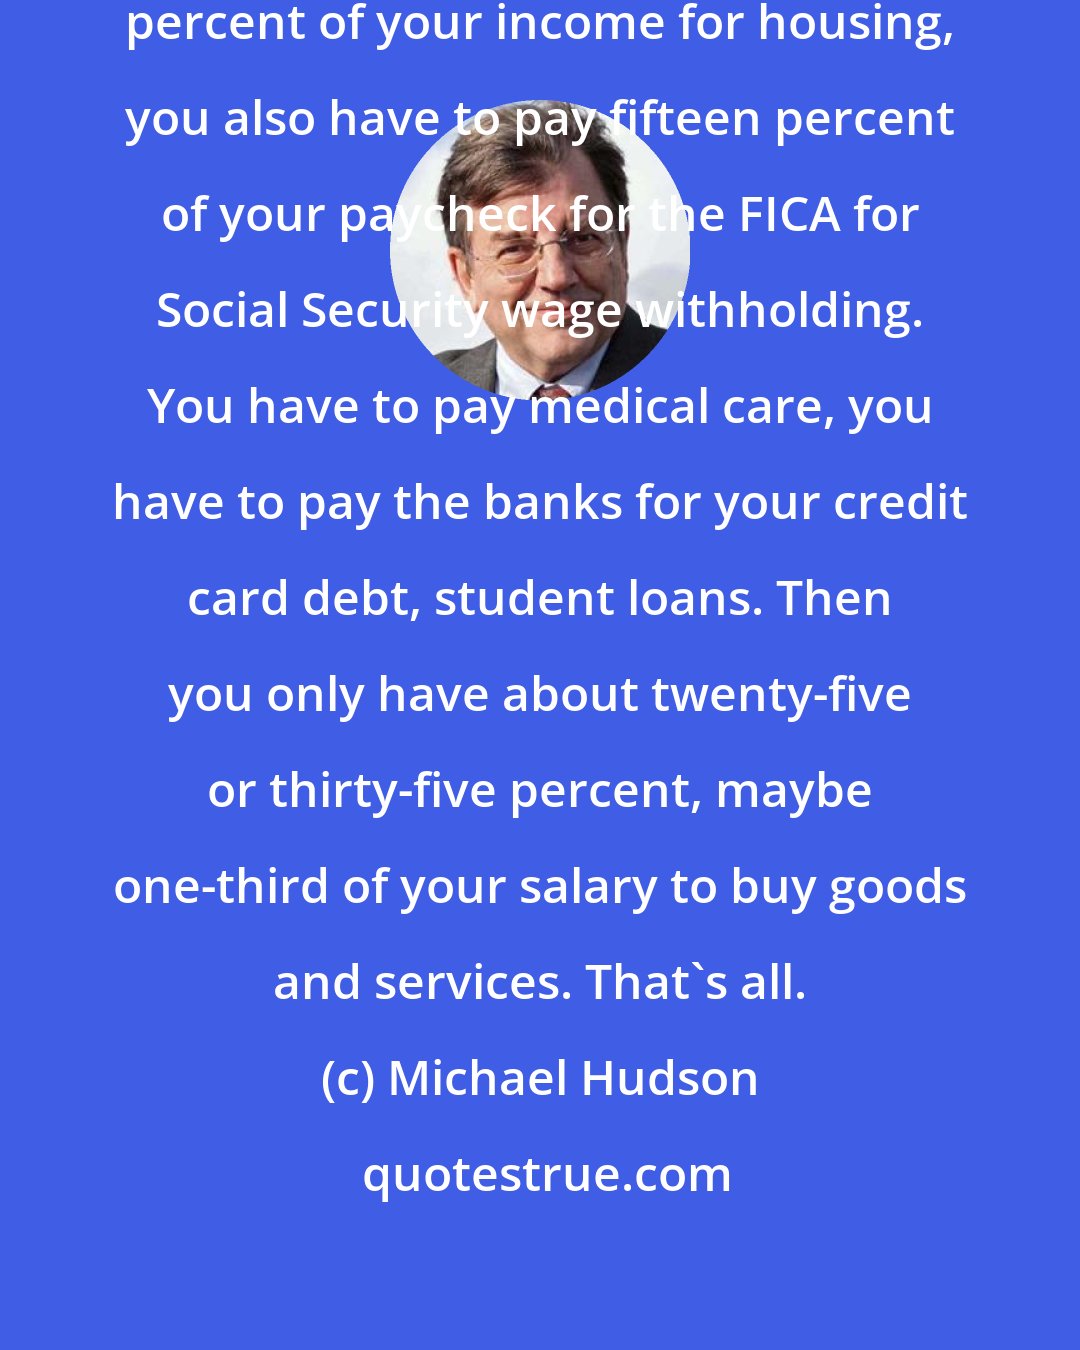 Michael Hudson: If you have to pay about forty to forty-three percent of your income for housing, you also have to pay fifteen percent of your paycheck for the FICA for Social Security wage withholding. You have to pay medical care, you have to pay the banks for your credit card debt, student loans. Then you only have about twenty-five or thirty-five percent, maybe one-third of your salary to buy goods and services. That's all.